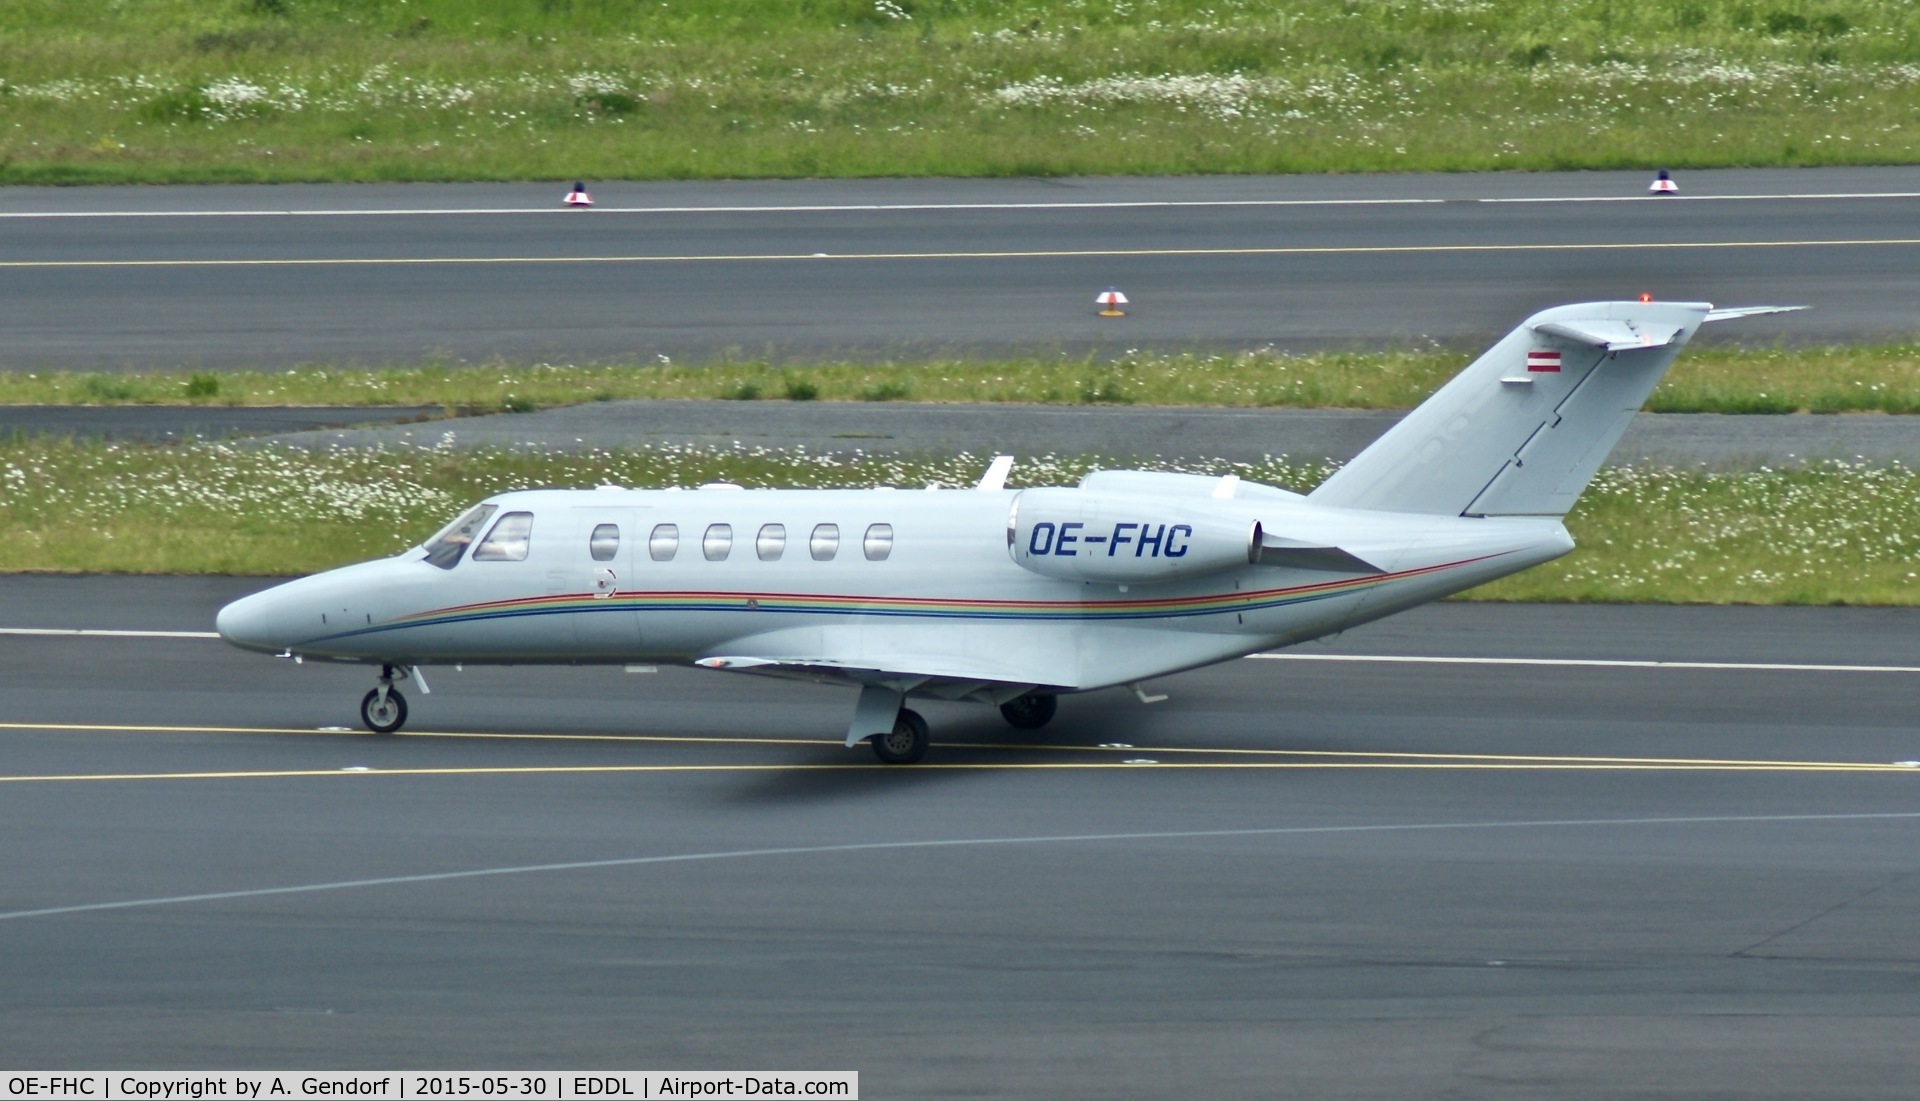 OE-FHC, 2008 Cessna 525A CitationJet CJ2+ C/N 525A-0415, Private, is here on taxiway 